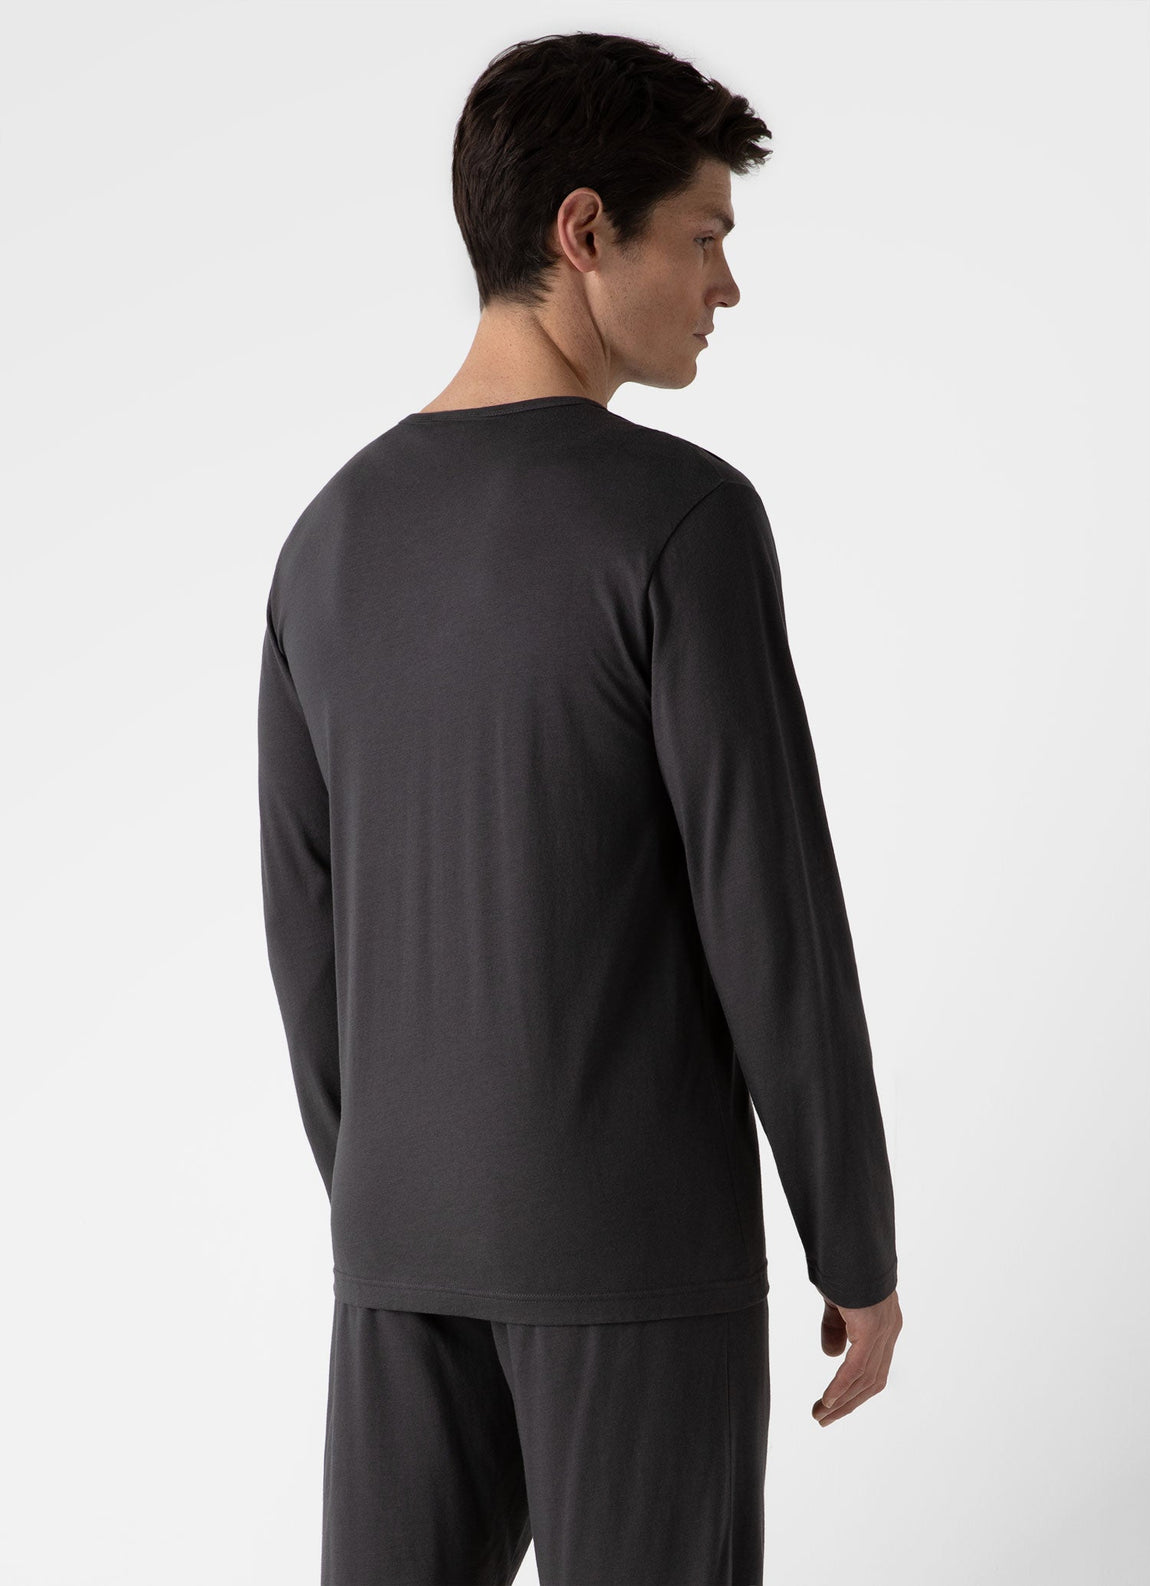 Black and Grey Panel Cotton Modal Long Sleeve T-shirt MTS 723 – The Archive